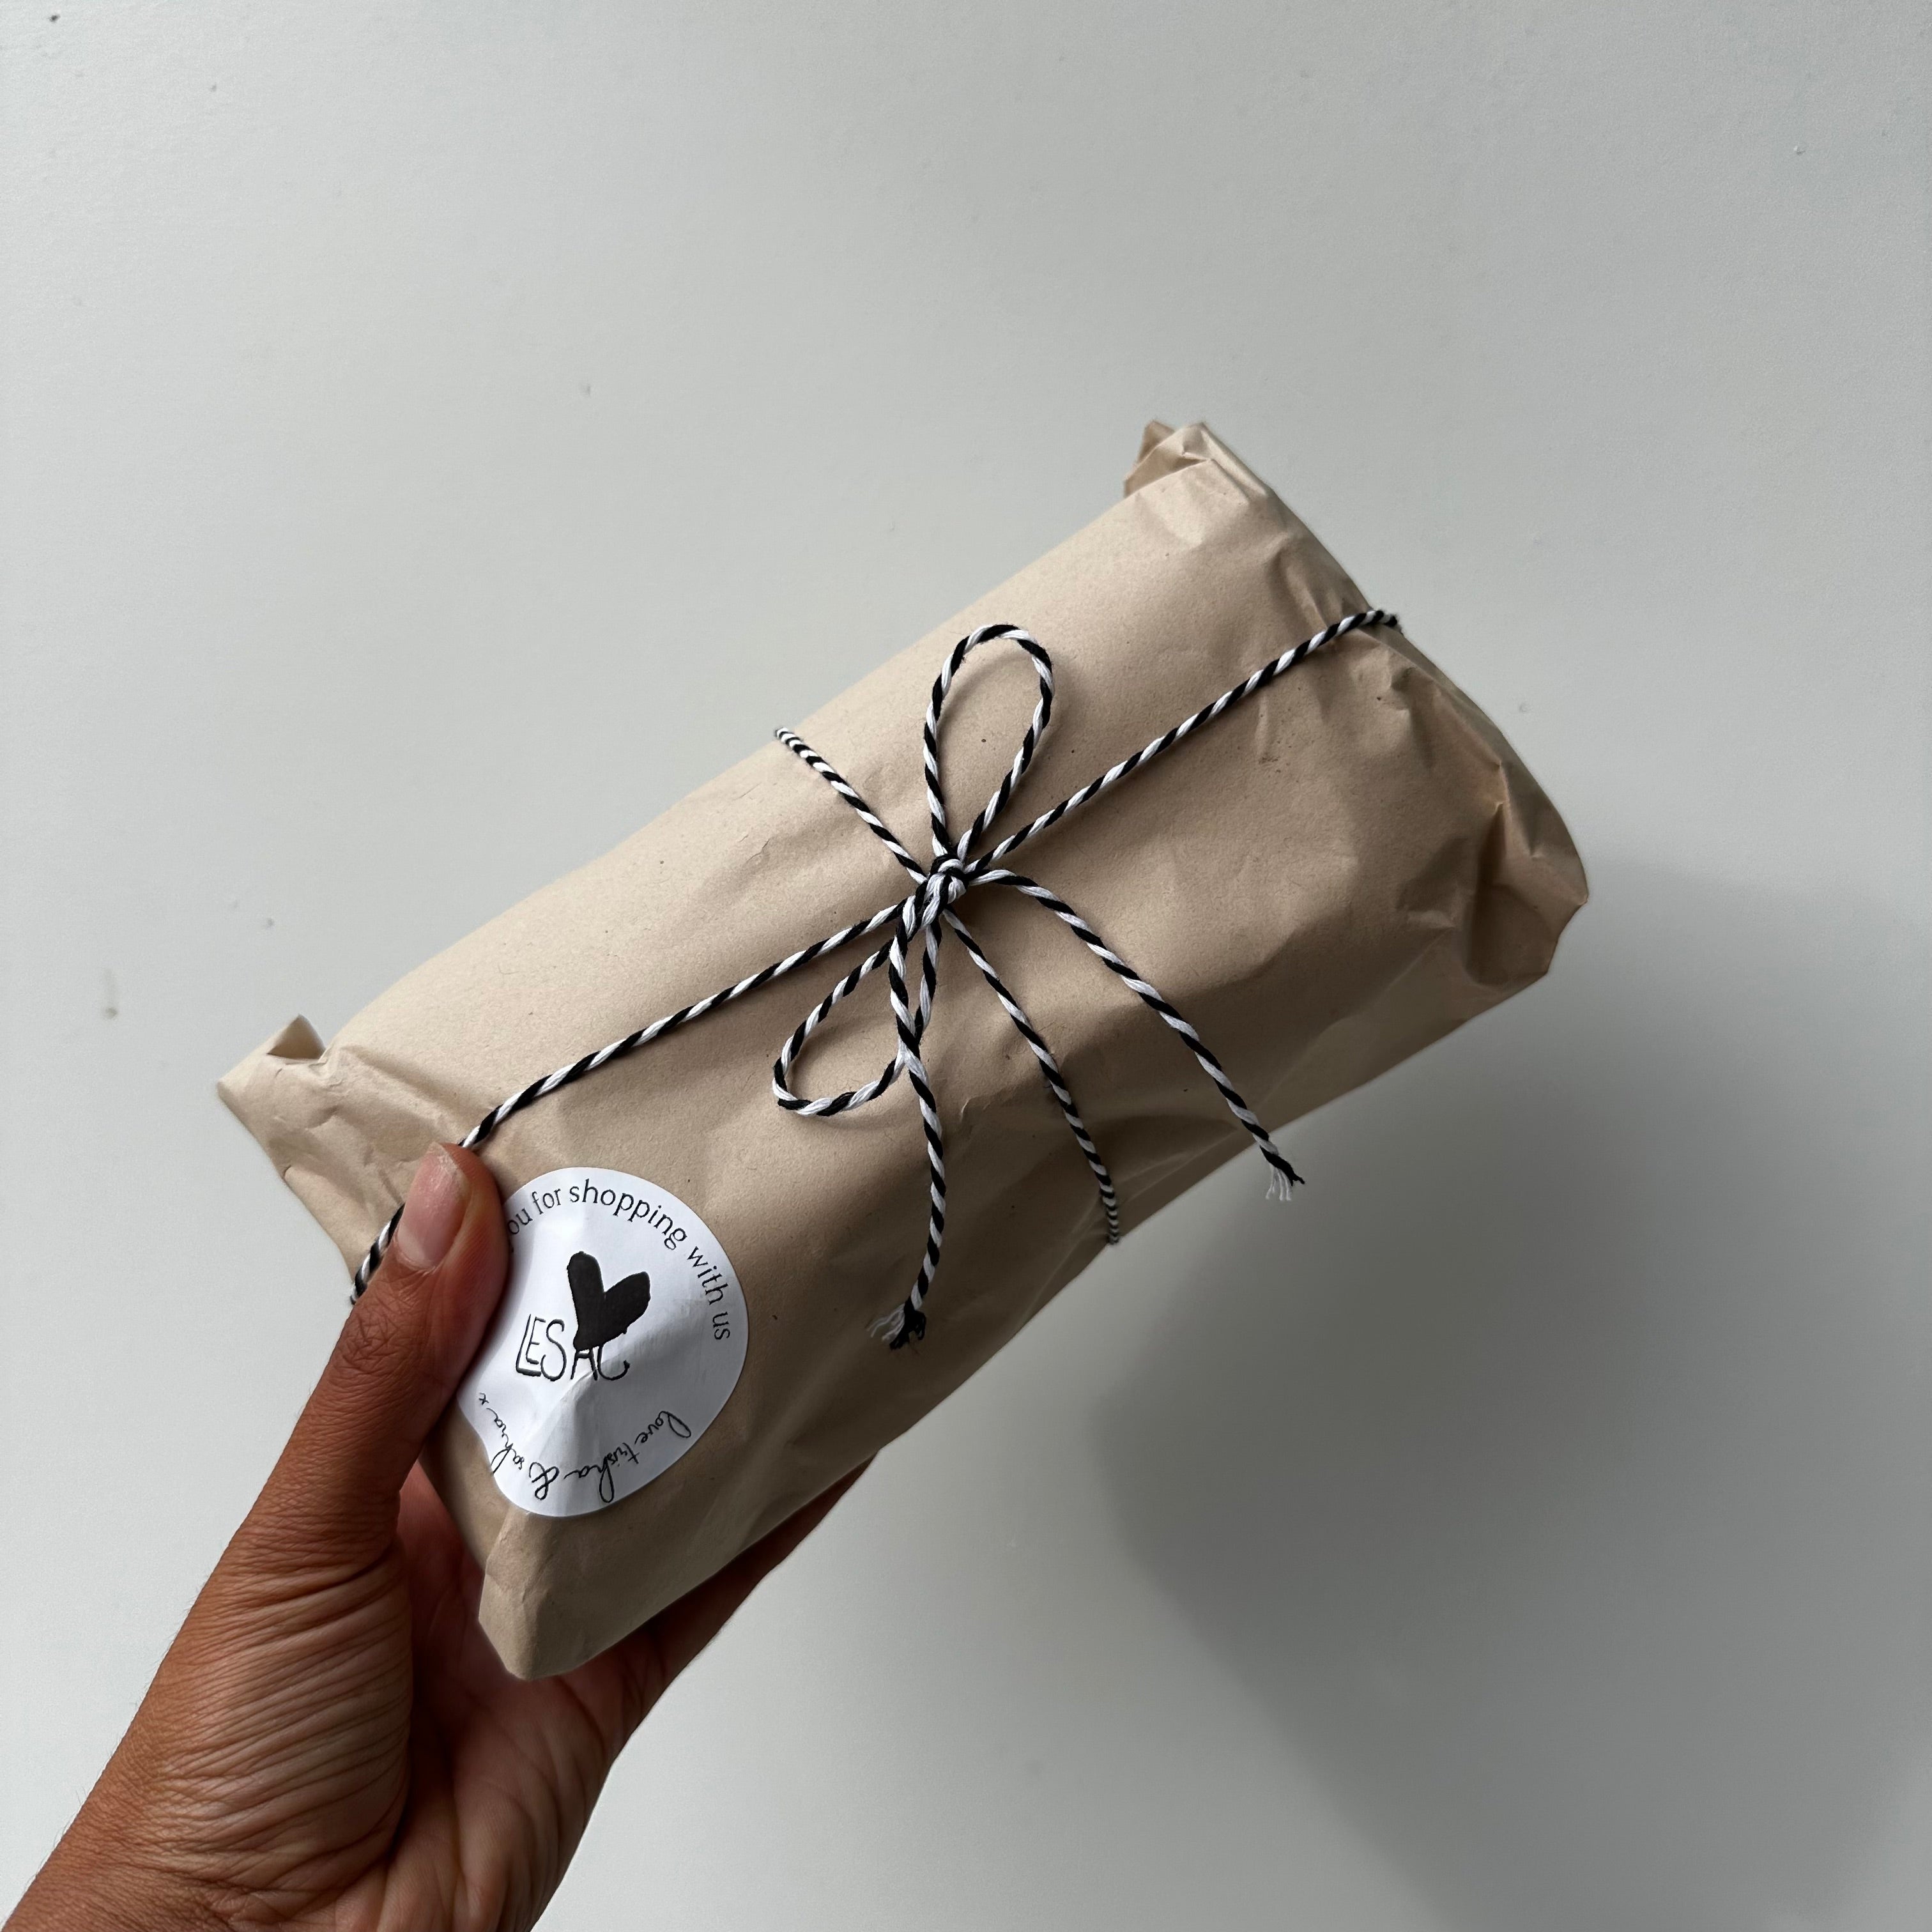 Le Sac Gift Wrapping with Brown Paper